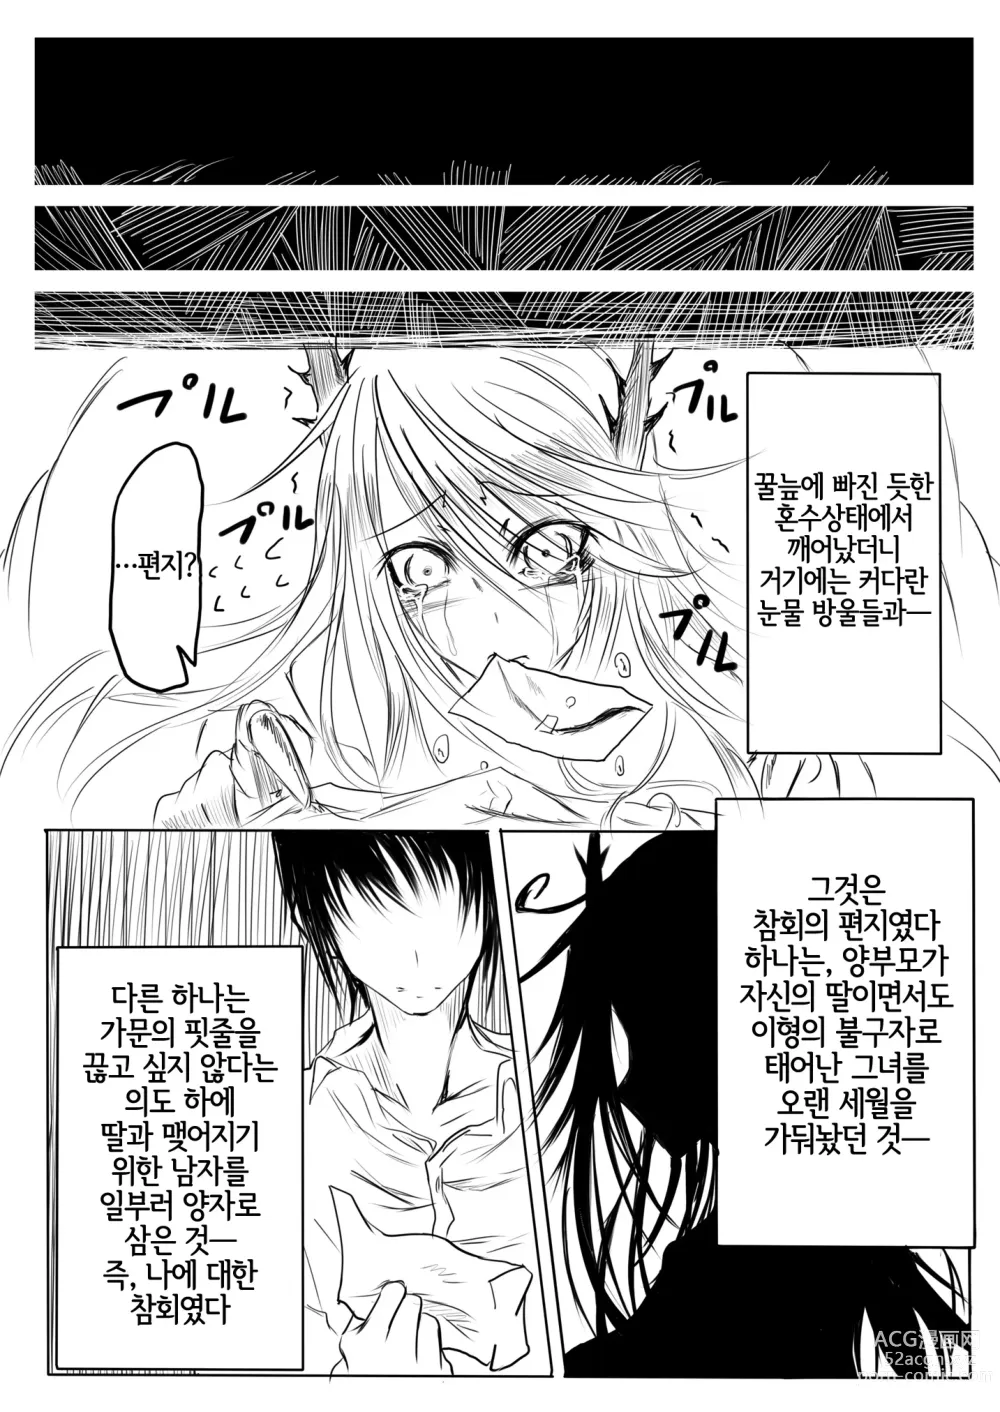 Page 19 of doujinshi A Reckless Worm Lady｜망양충